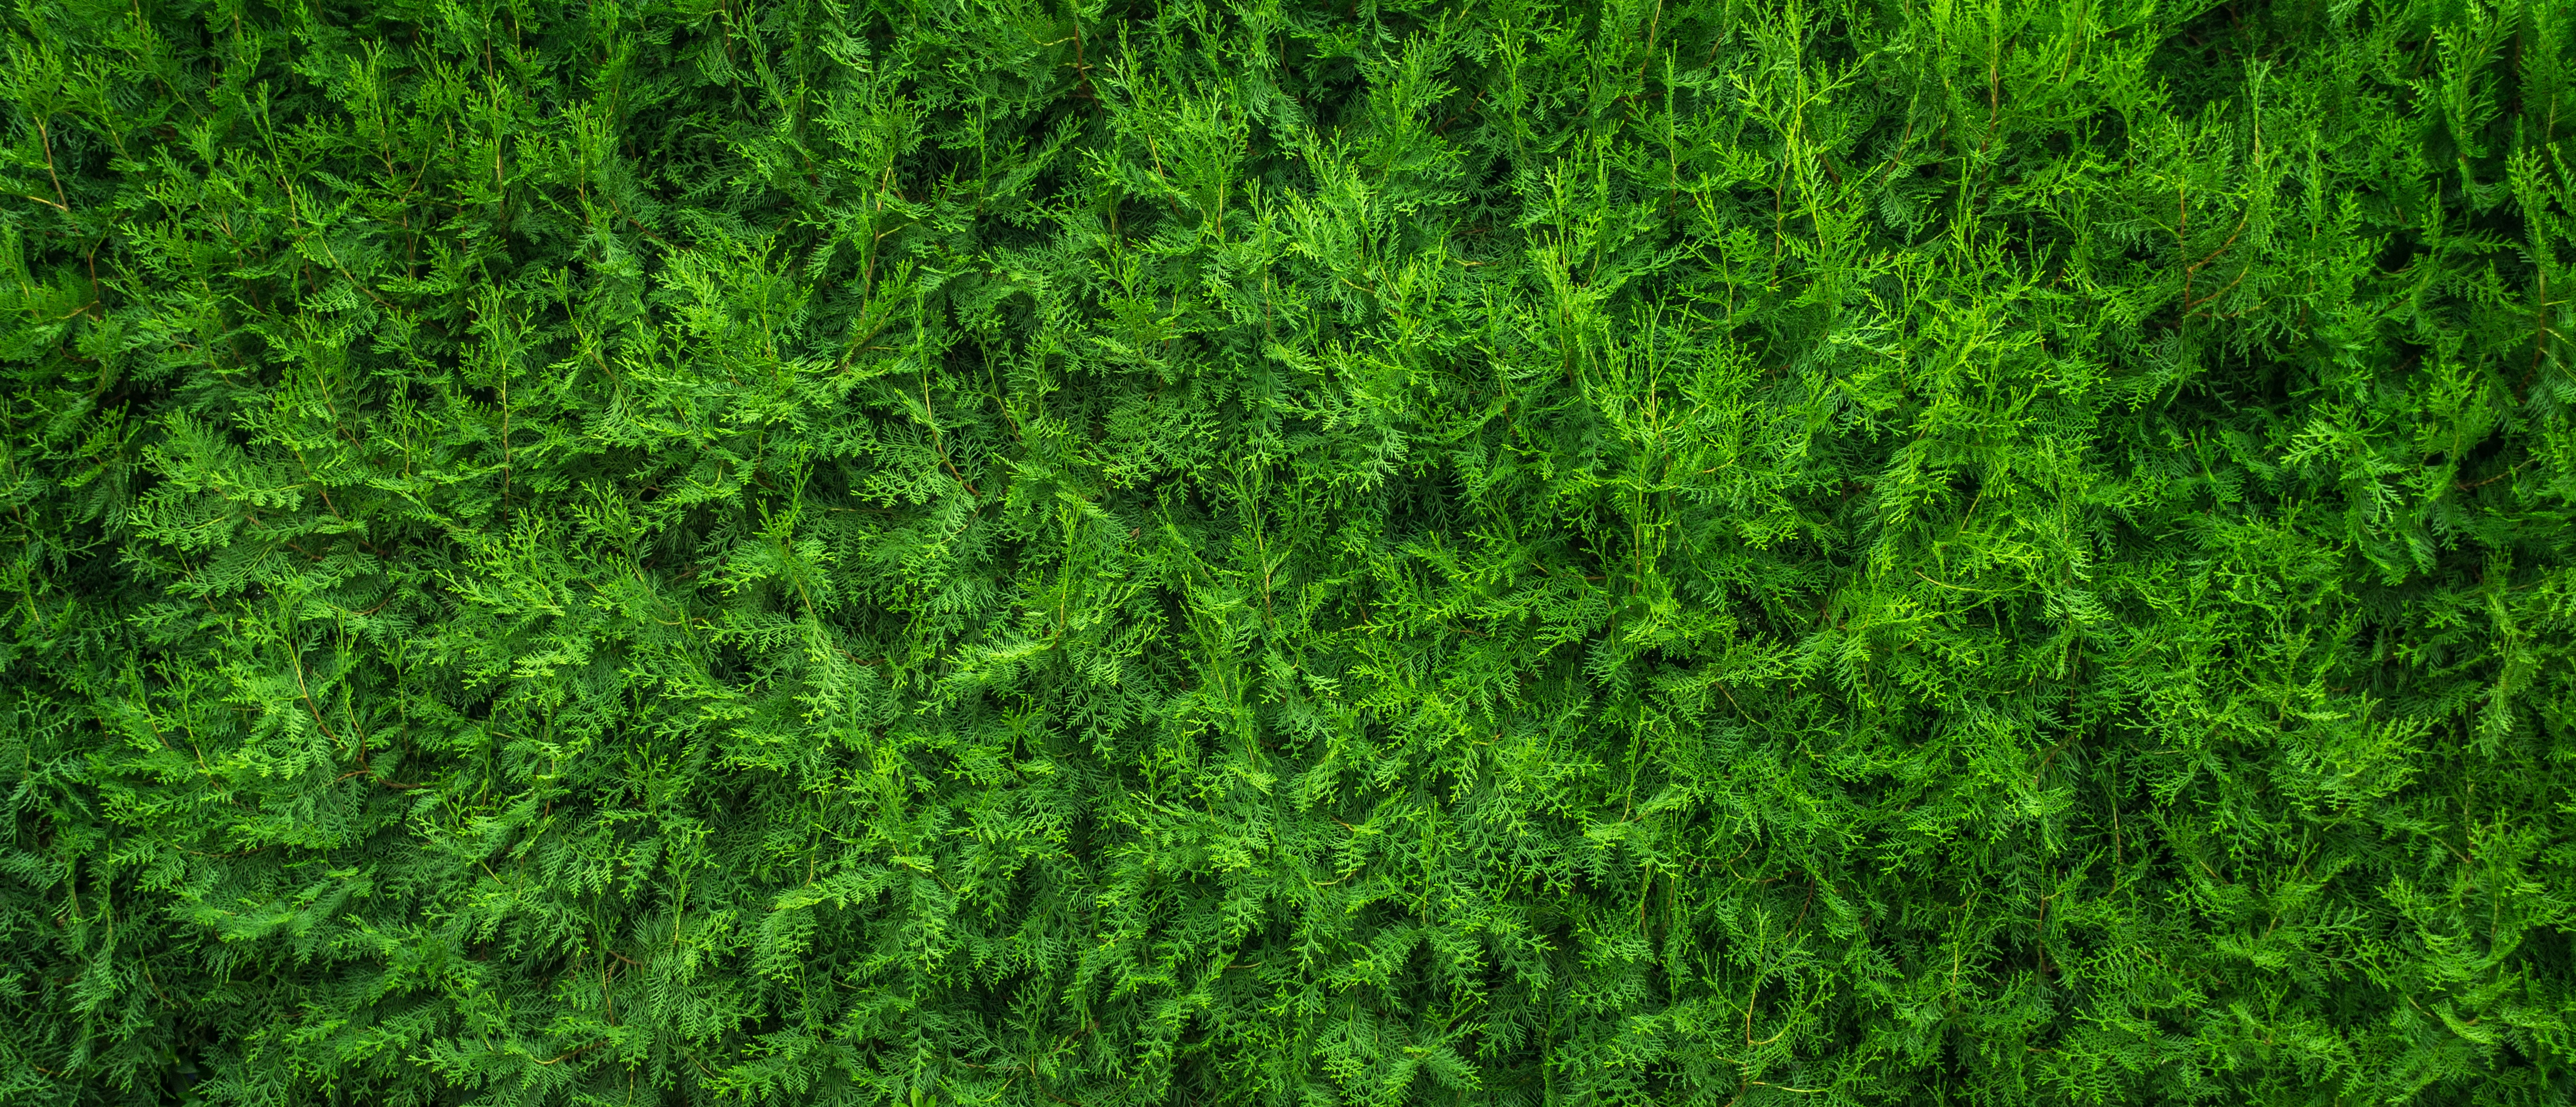 Wallpapers nature grass plant on the desktop